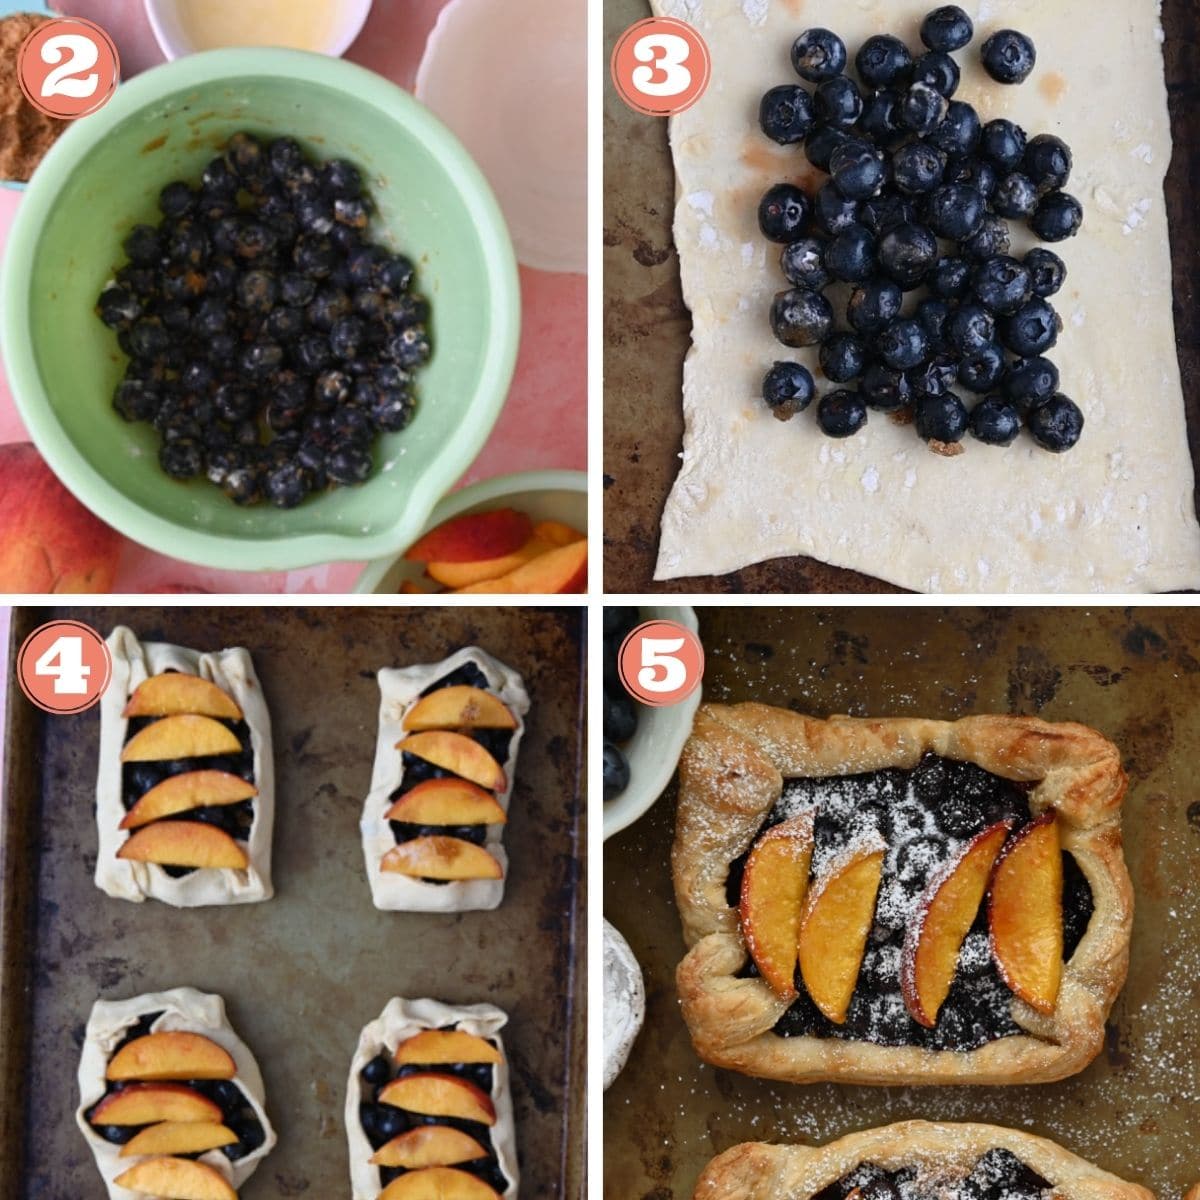 Steps 1 through 4 to make puff pastry tarts.